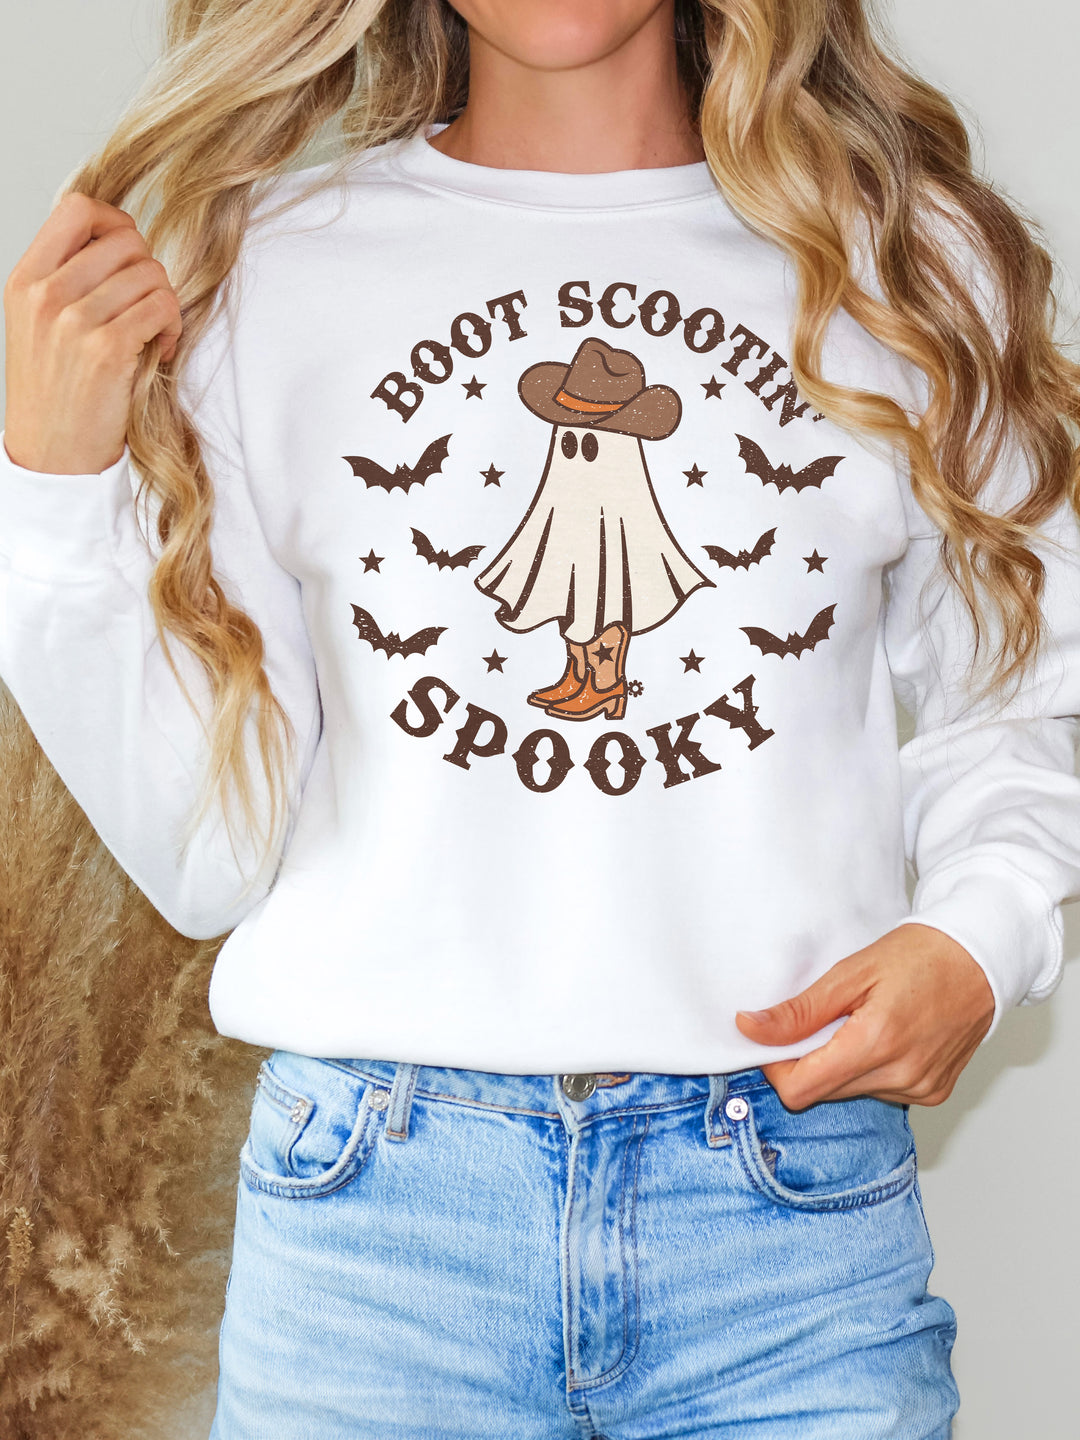 Glamfox Boot Scootin' Spooky Graphic Sweater